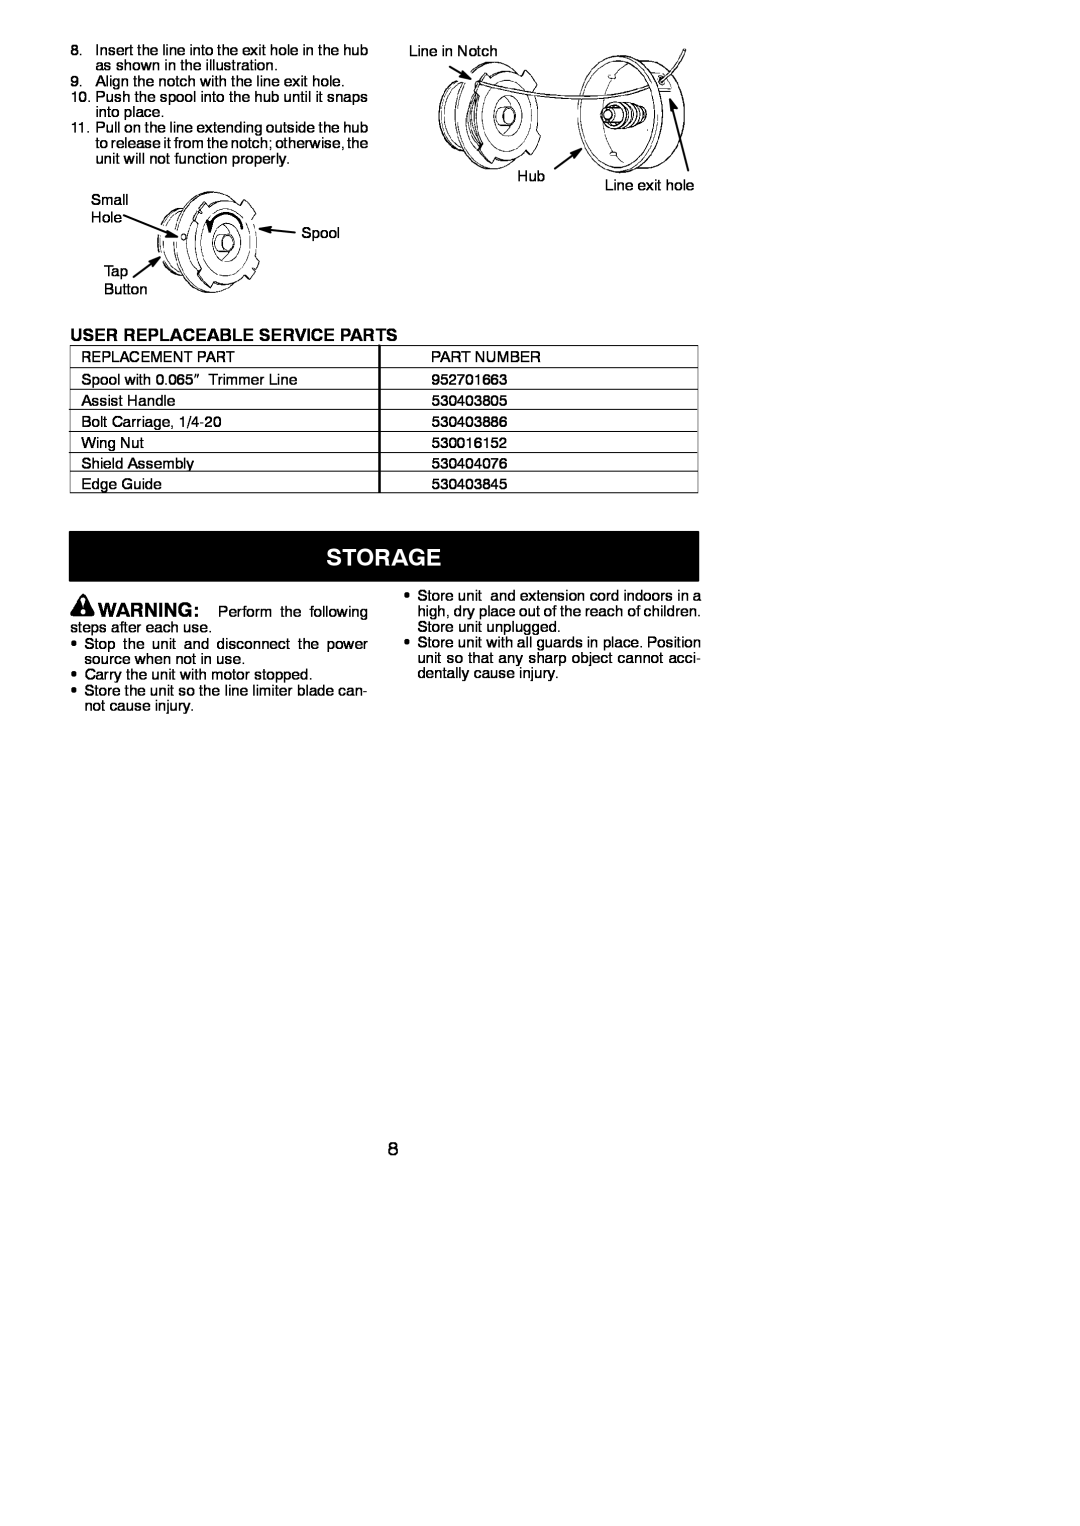 Weed Eater 952711905 instruction manual Storage, User Replaceable Service Parts 